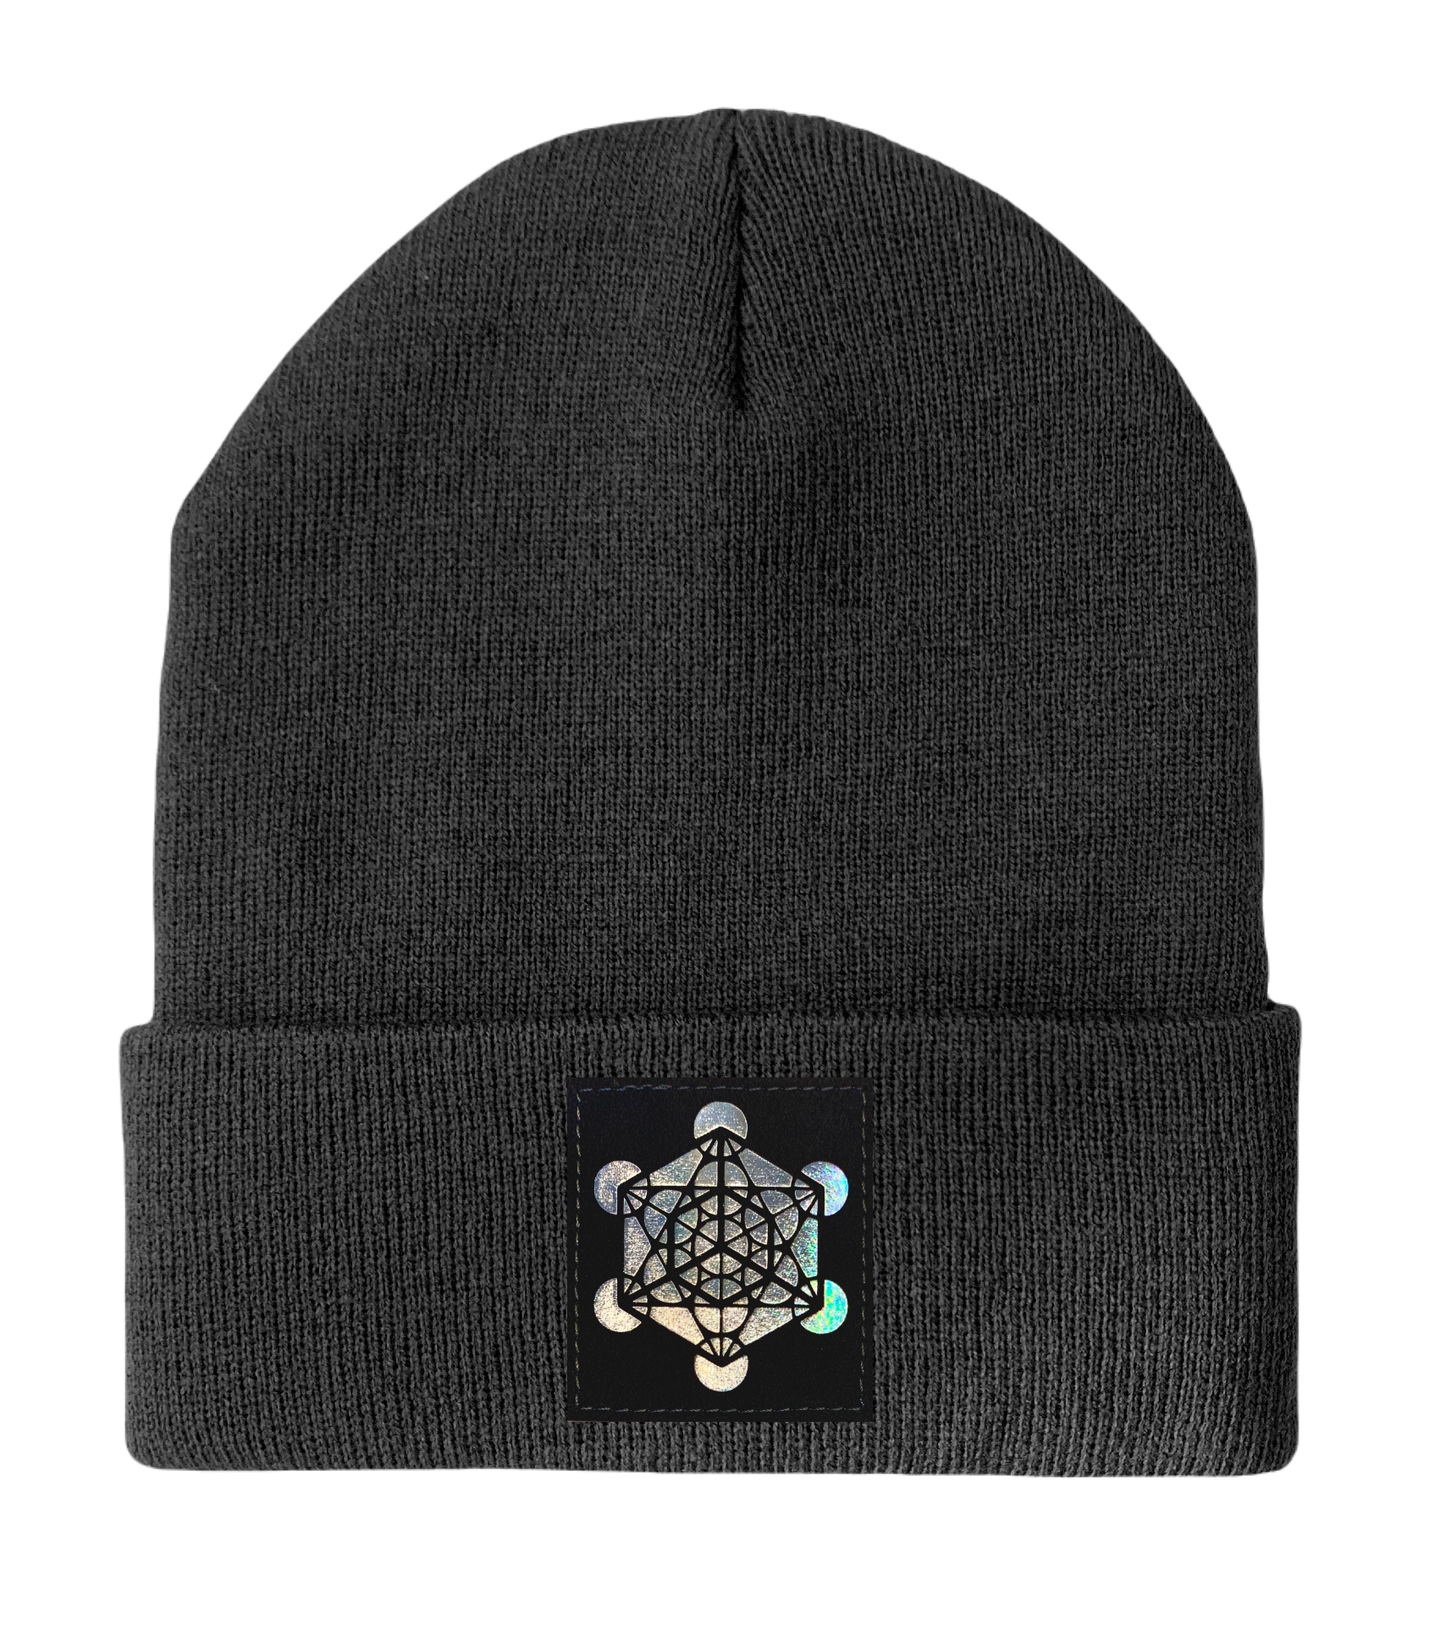 Beanie - Dark Grey w Hand Made Grey/Holographic Silver Vegan Leather Metatron's Cube Patch